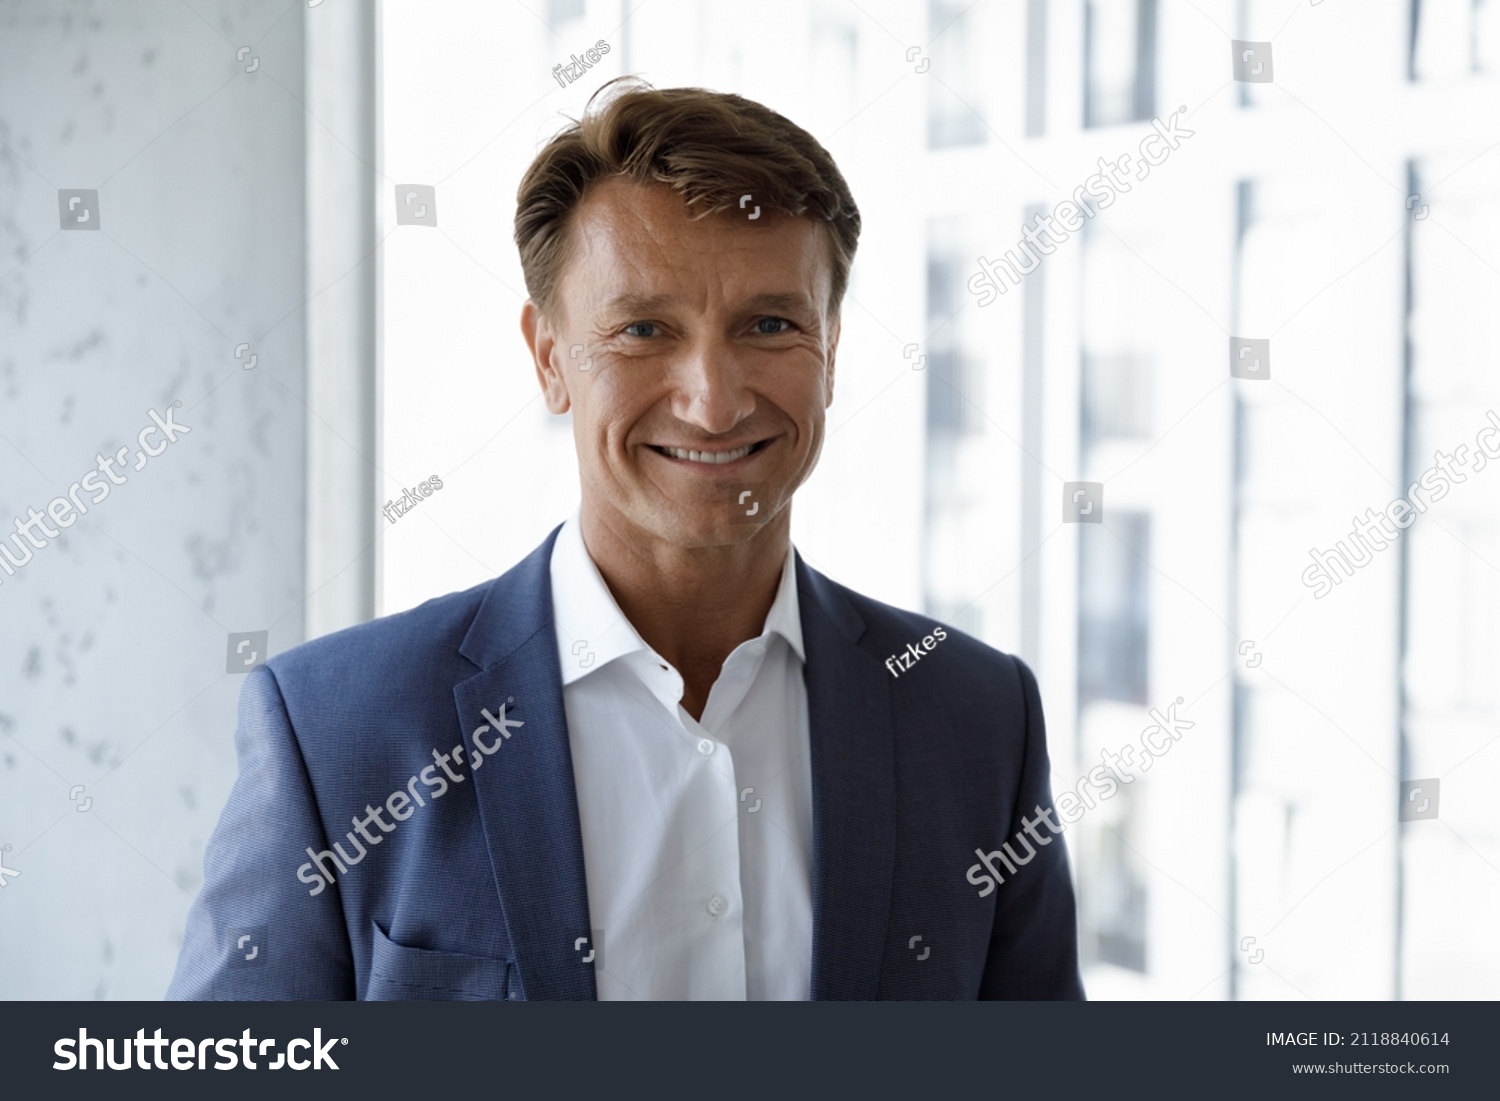 Happy mature male business leader head shot portrait. Confident middle aged 50s businessman, CEO, executive in formal suit looking at camera, smiling, standing at office window. Job success concept #2118840614